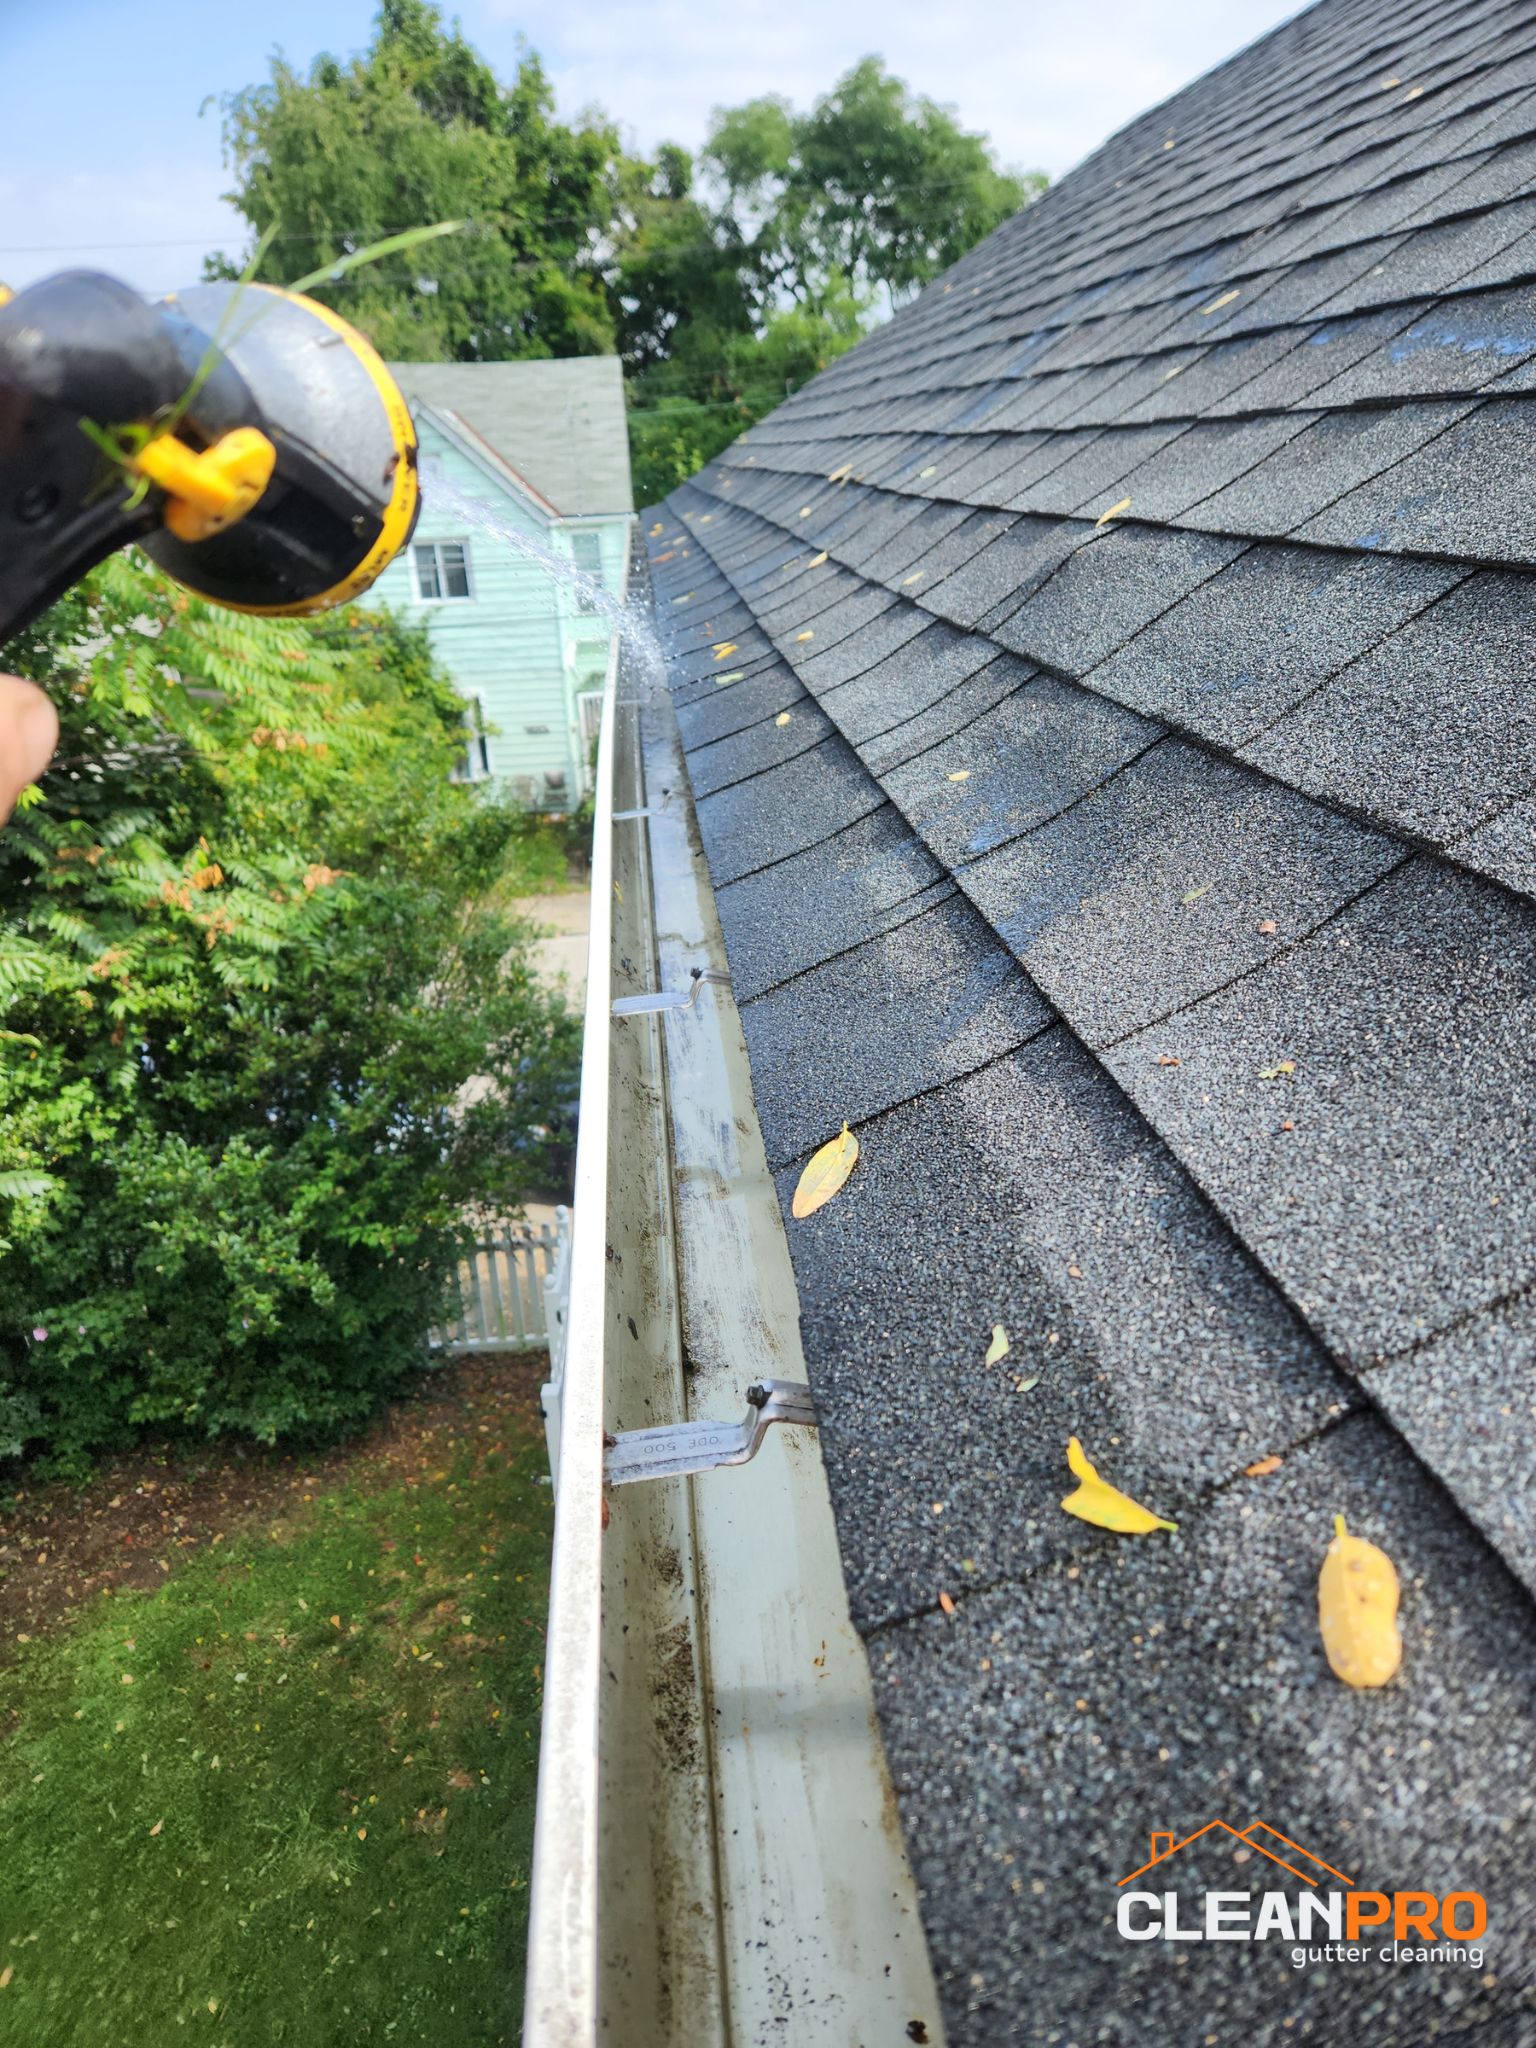 Professional Boston Gutter Cleaners